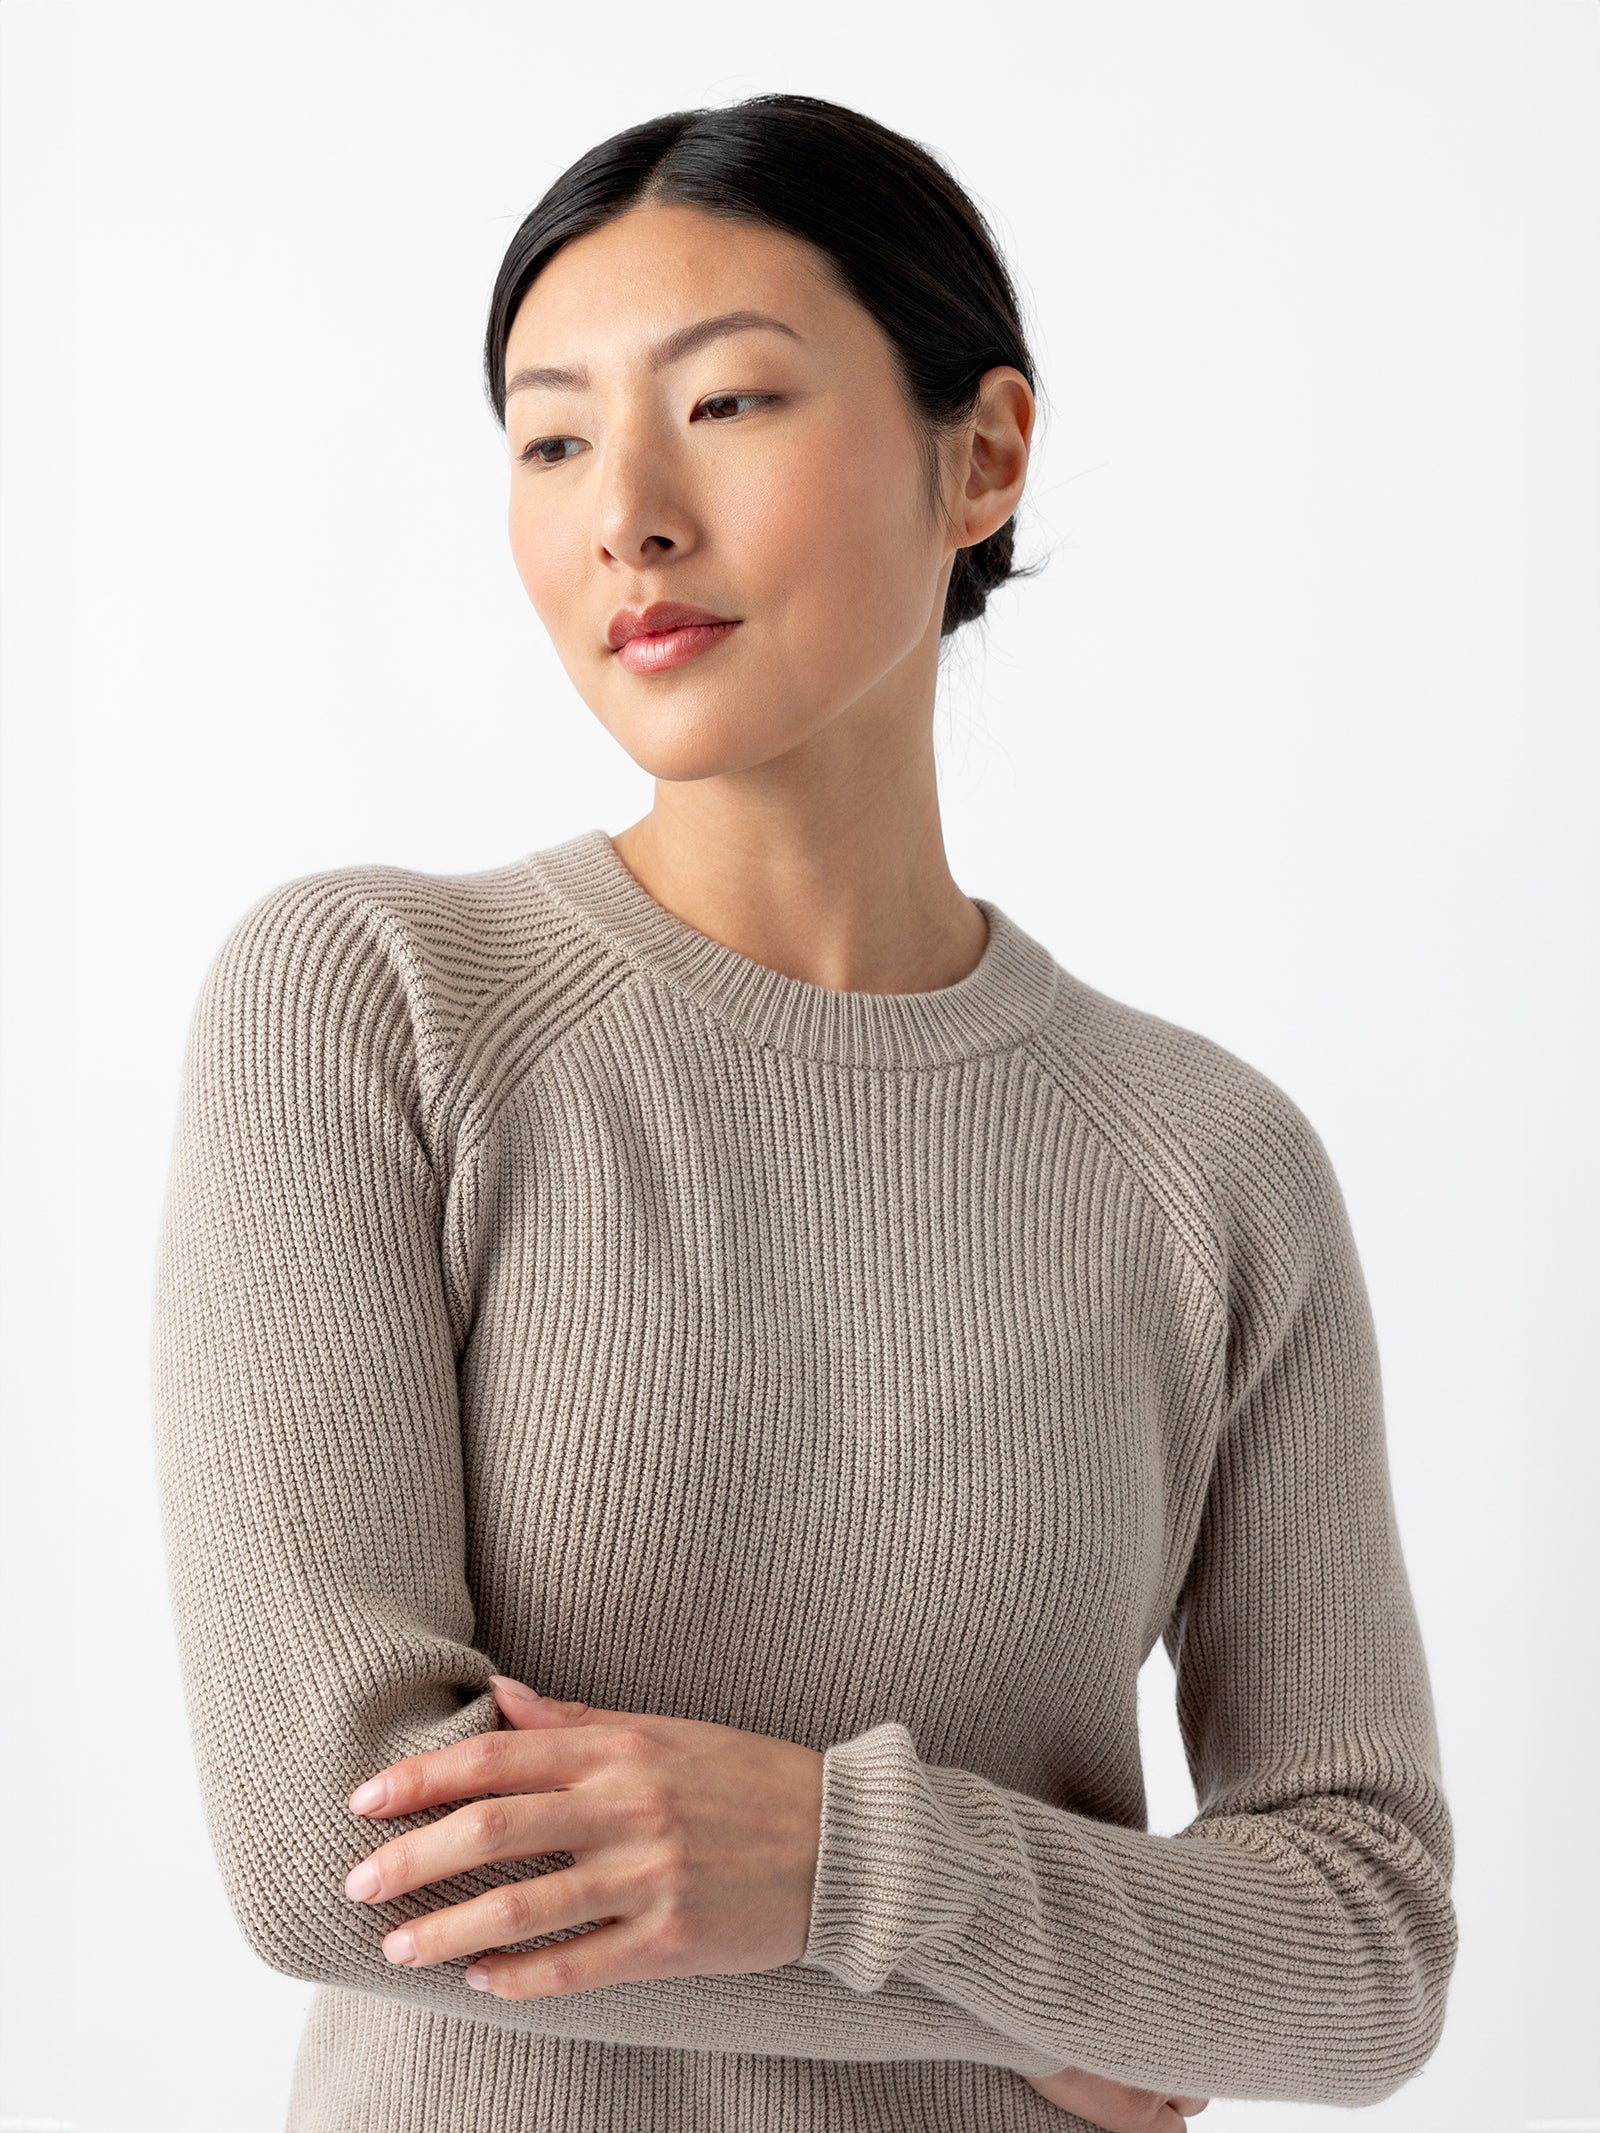 A person with dark hair pulled back is wearing a light gray, long-sleeved Women's Classic Crewneck from Cozy Earth. They are looking to the side with a neutral expression and have their arms crossed gently in front of them. The background is plain white. 